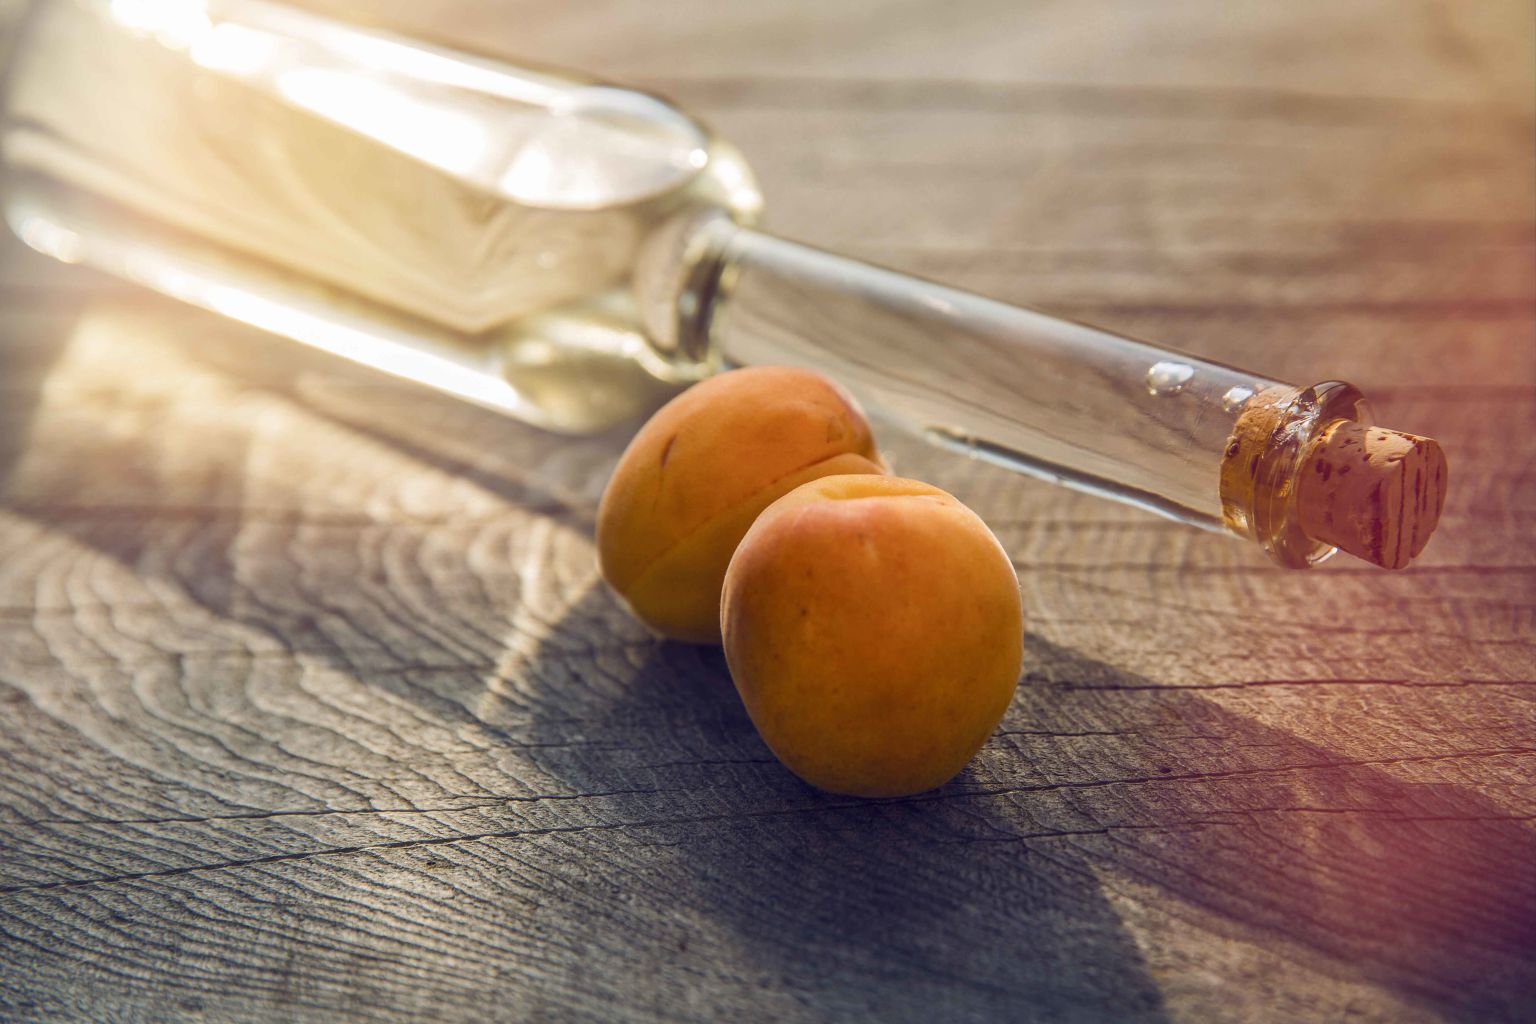 Two apricots next to a glass bottle, Valais, Switzerland